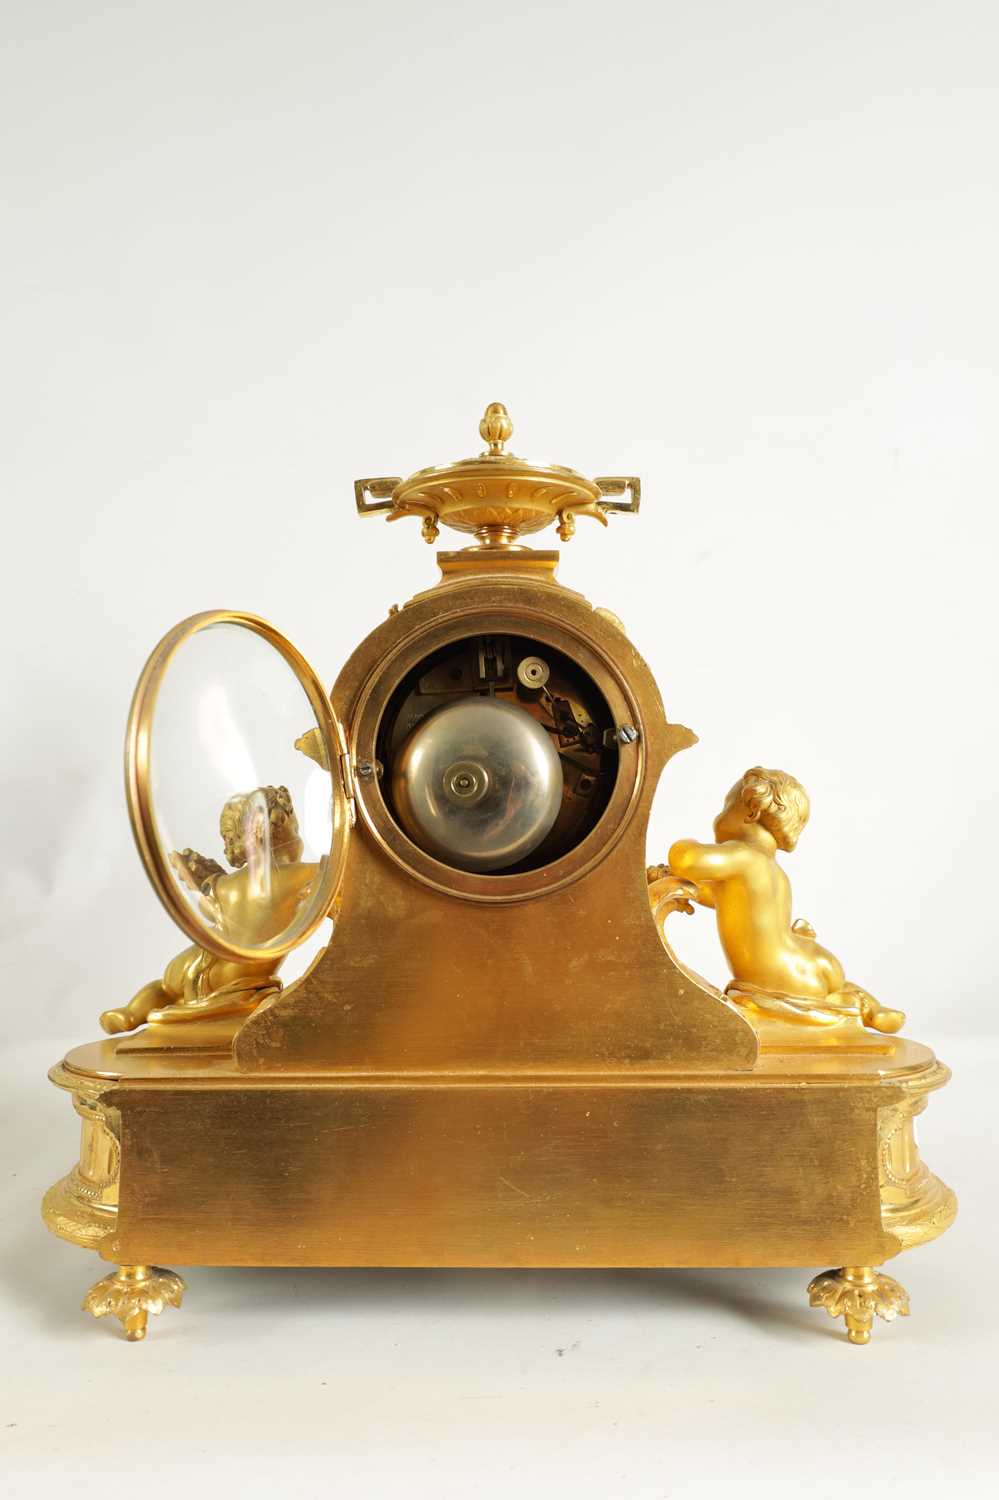 A LATE 19TH CENTURY FRENCH ORMOLU AND PORCELAIN PANELLED FIGURAL MANTEL CLOCK - Image 11 of 12